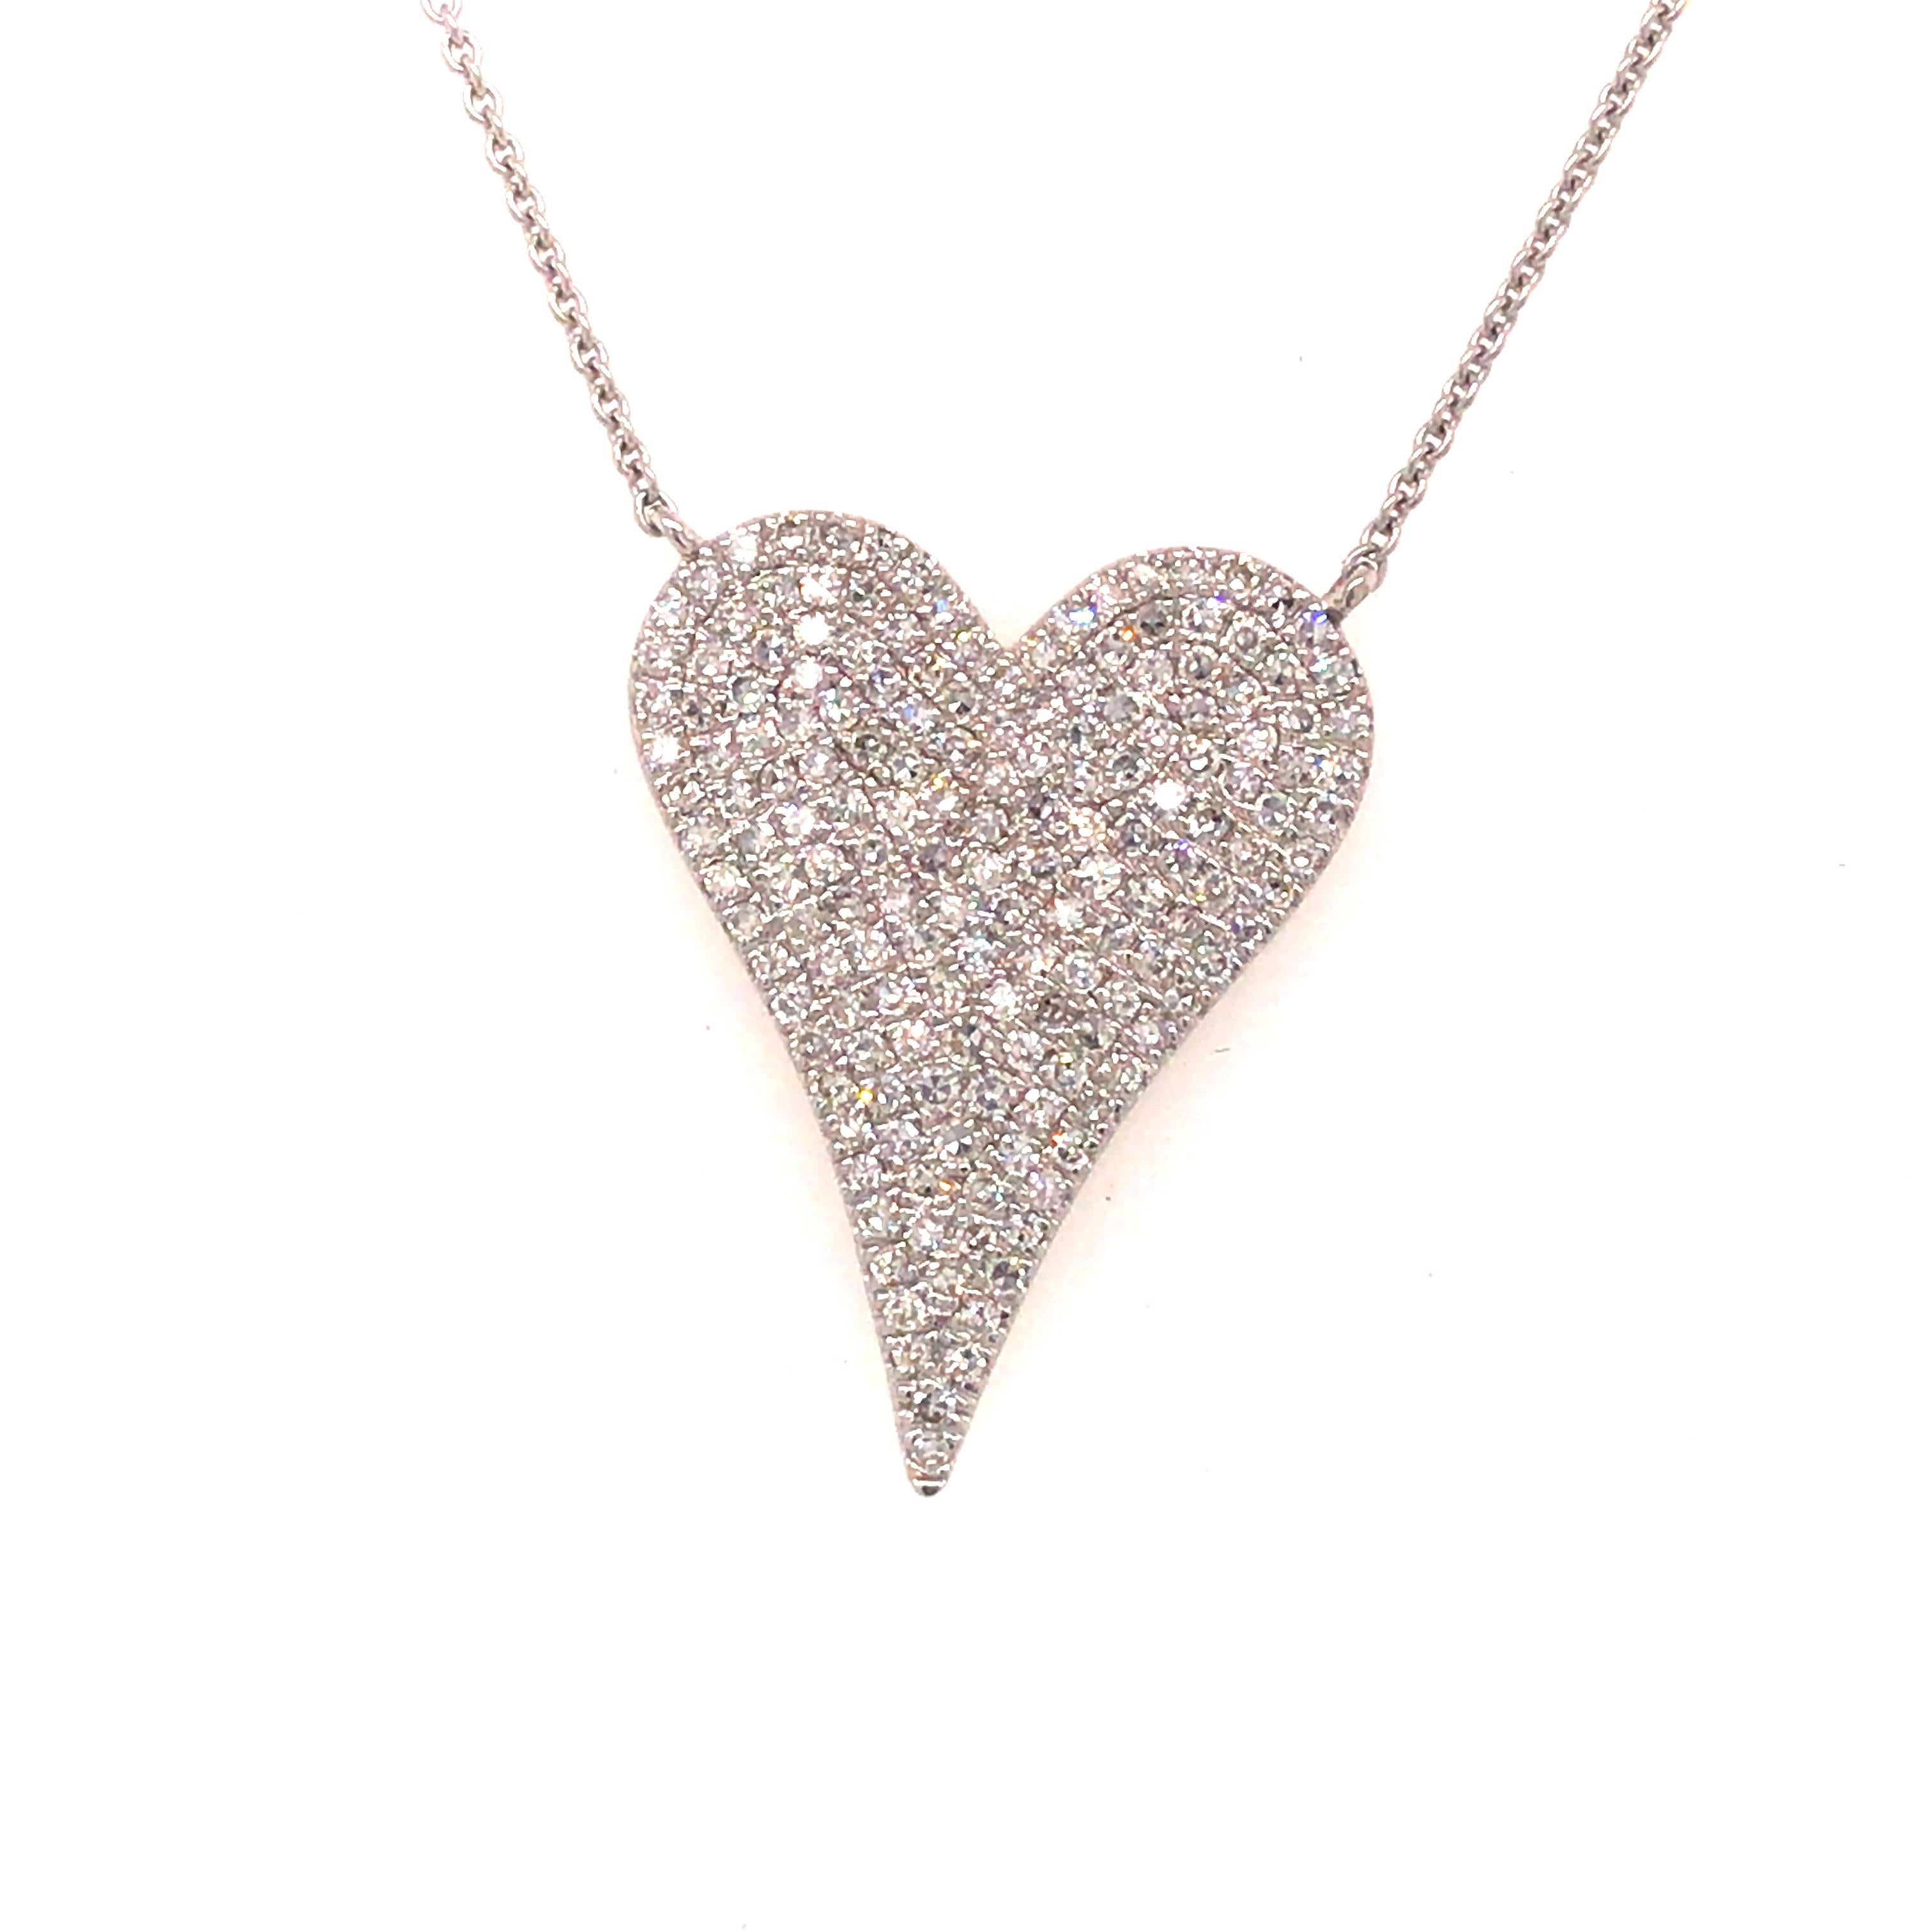 Diamond Pave Heart Necklace in 14K White Gold.  Round Brilliant Cut Diamonds weighing 0.53 carat total weight, G-I in color and VS in clarity are expertly set.  The Necklace measures 17 inch in length.  The Pendant measures 7/8 inch in length and